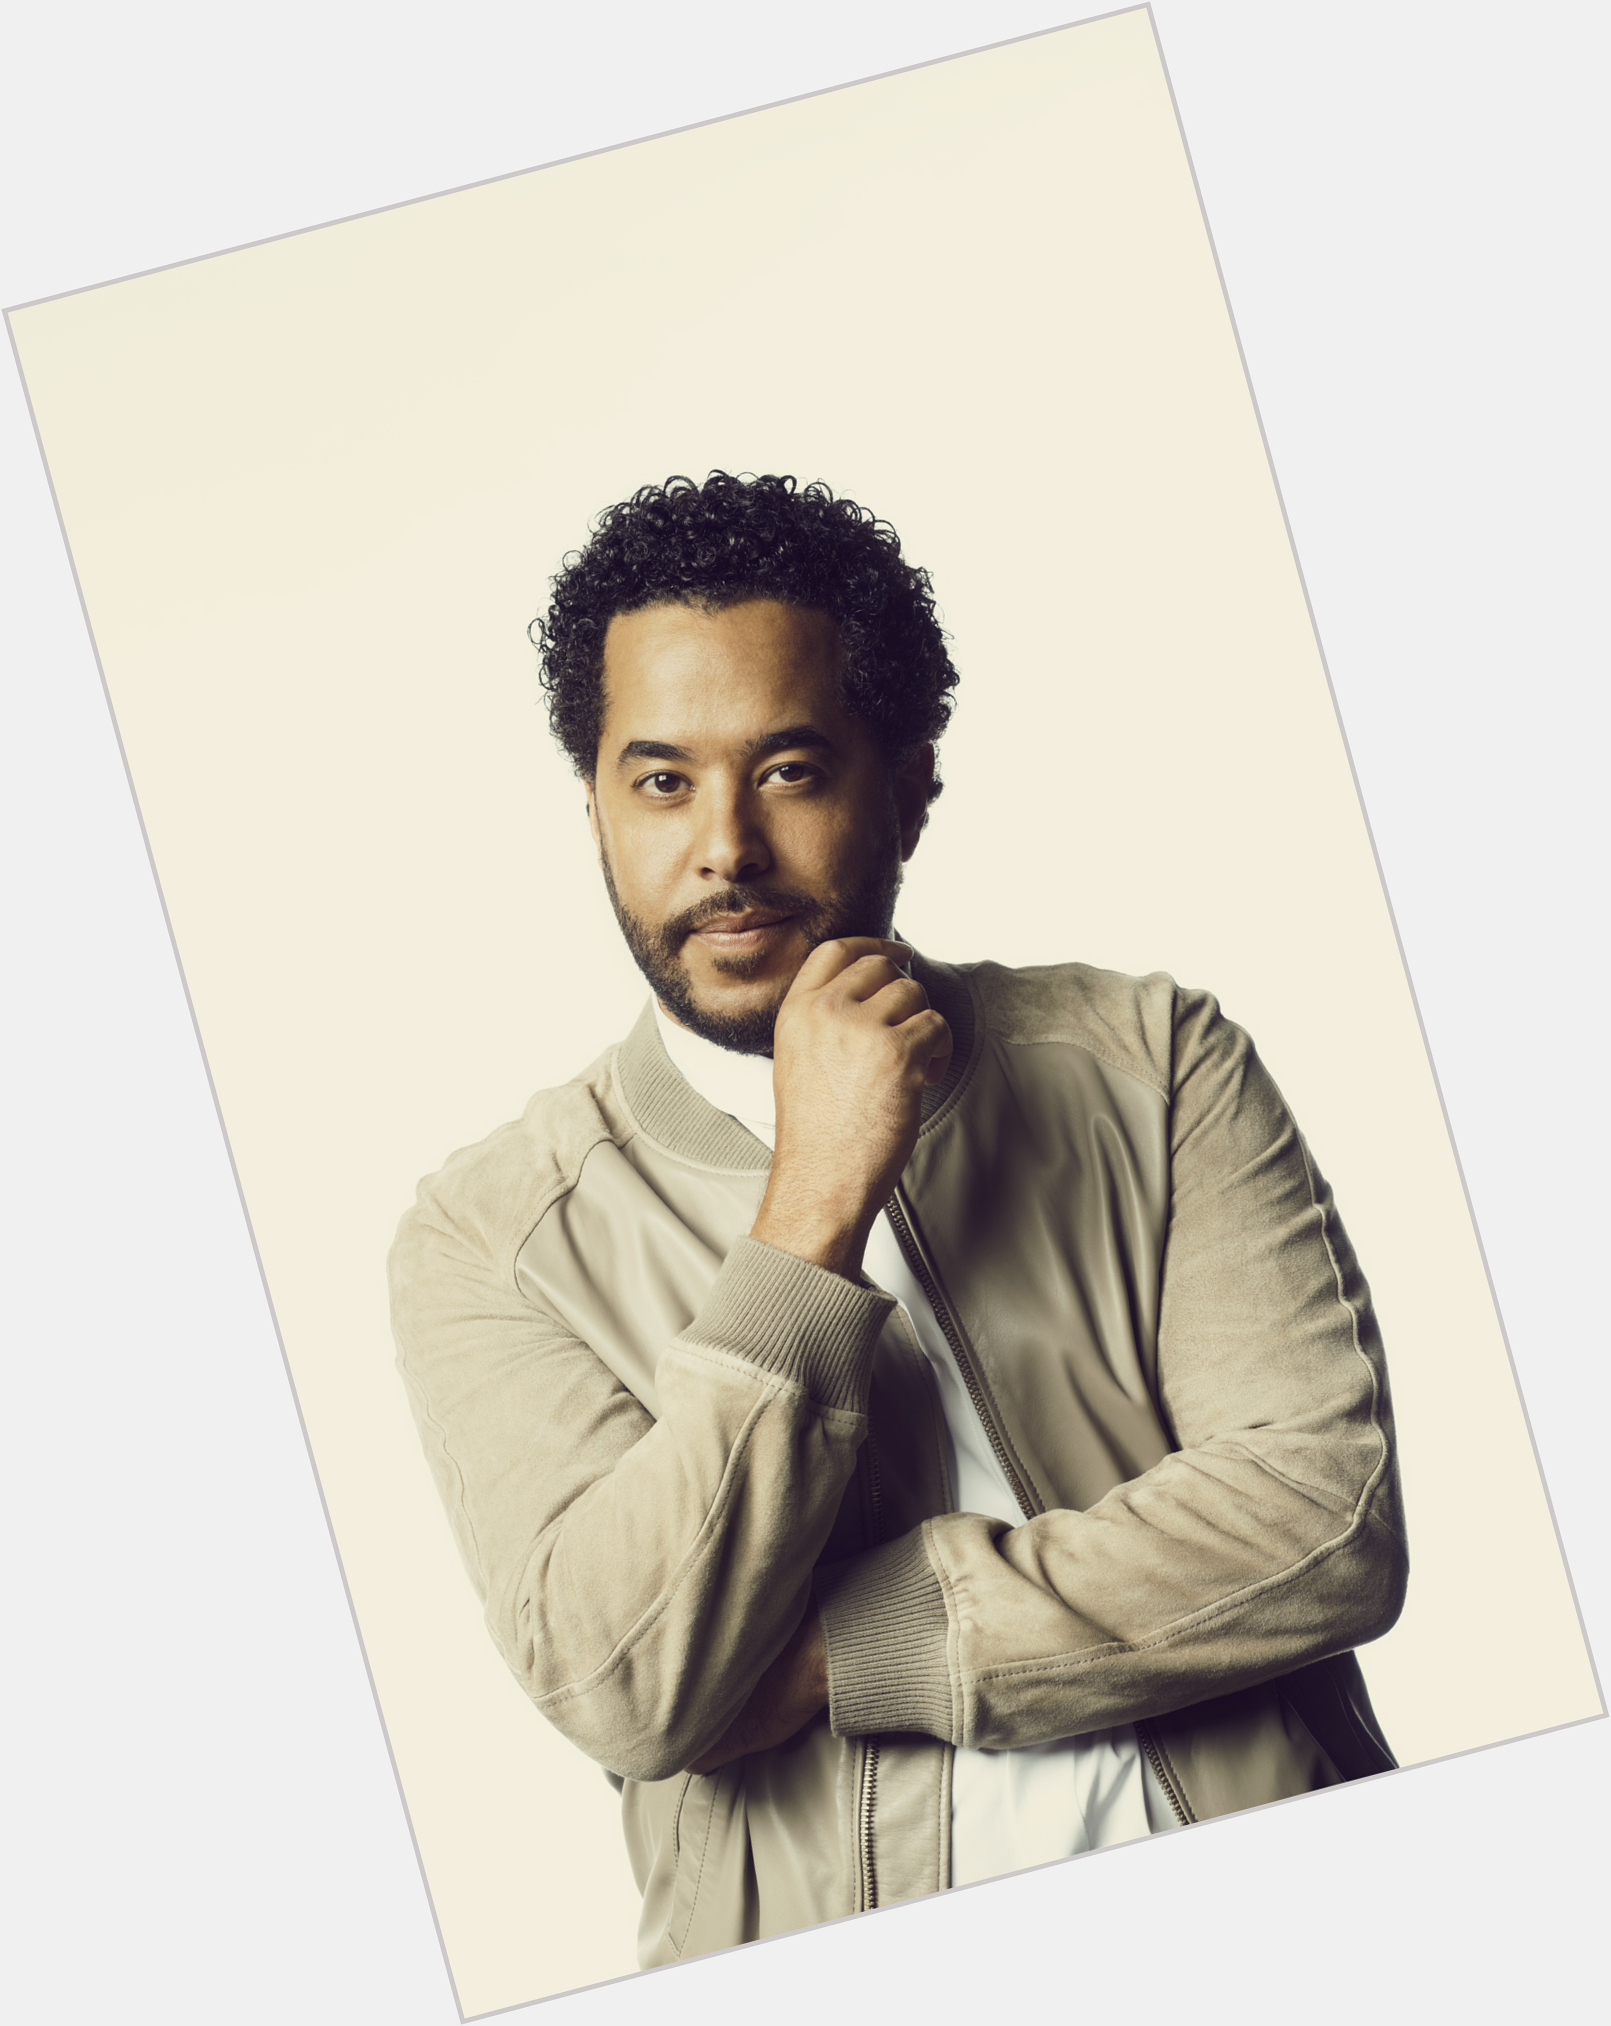 <a href="/hot-men/adel-tawil/where-dating-news-photos">Adel Tawil</a>  black hair & hairstyles